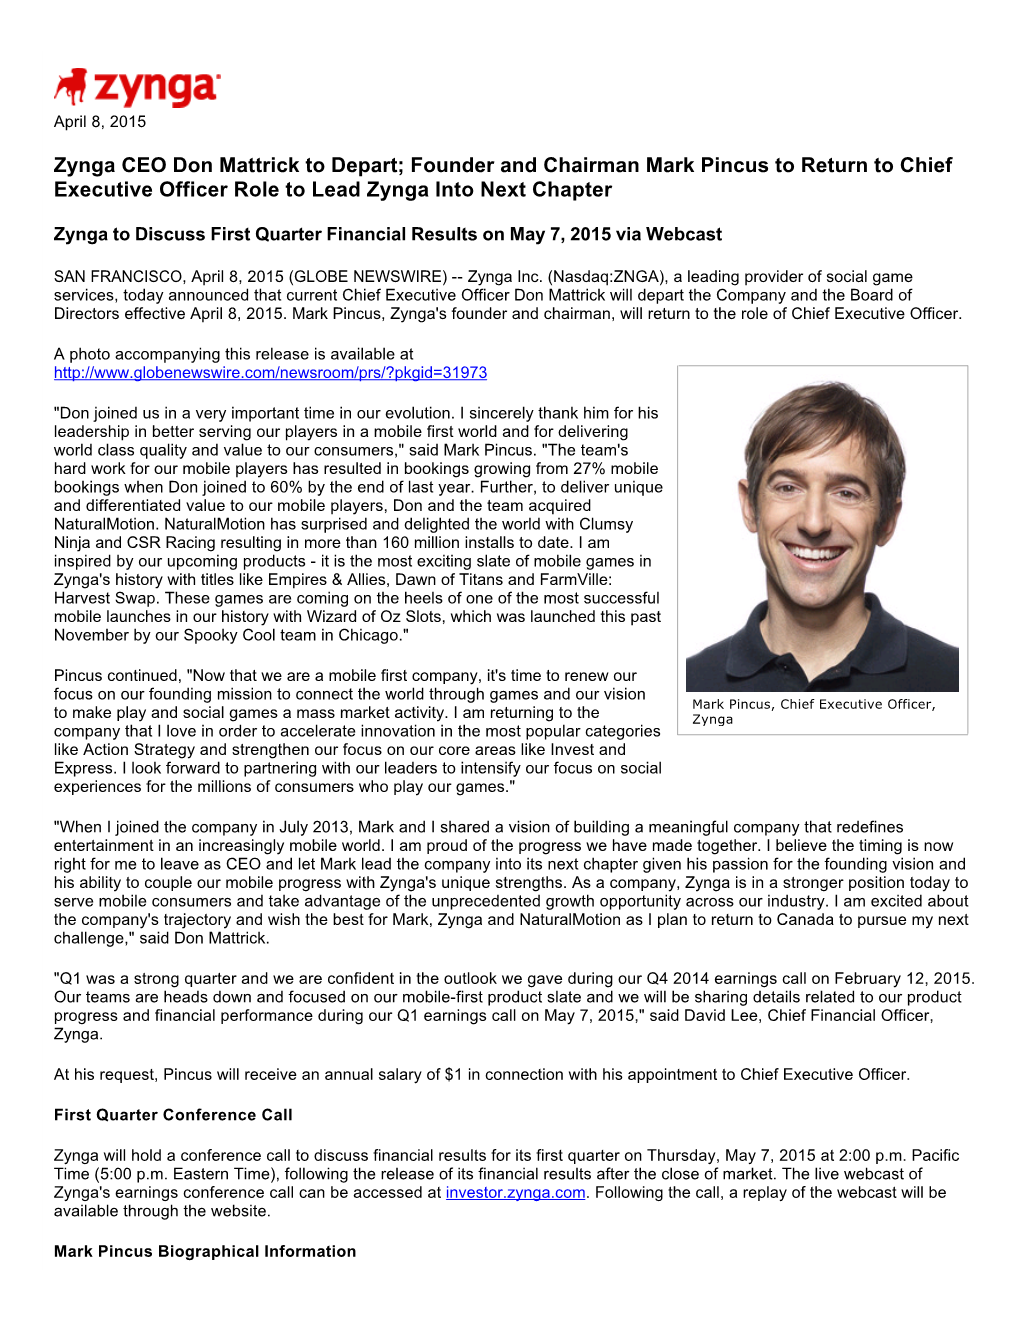 Zynga CEO Don Mattrick to Depart; Founder and Chairman Mark Pincus to Return to Chief Executive Officer Role to Lead Zynga Into Next Chapter